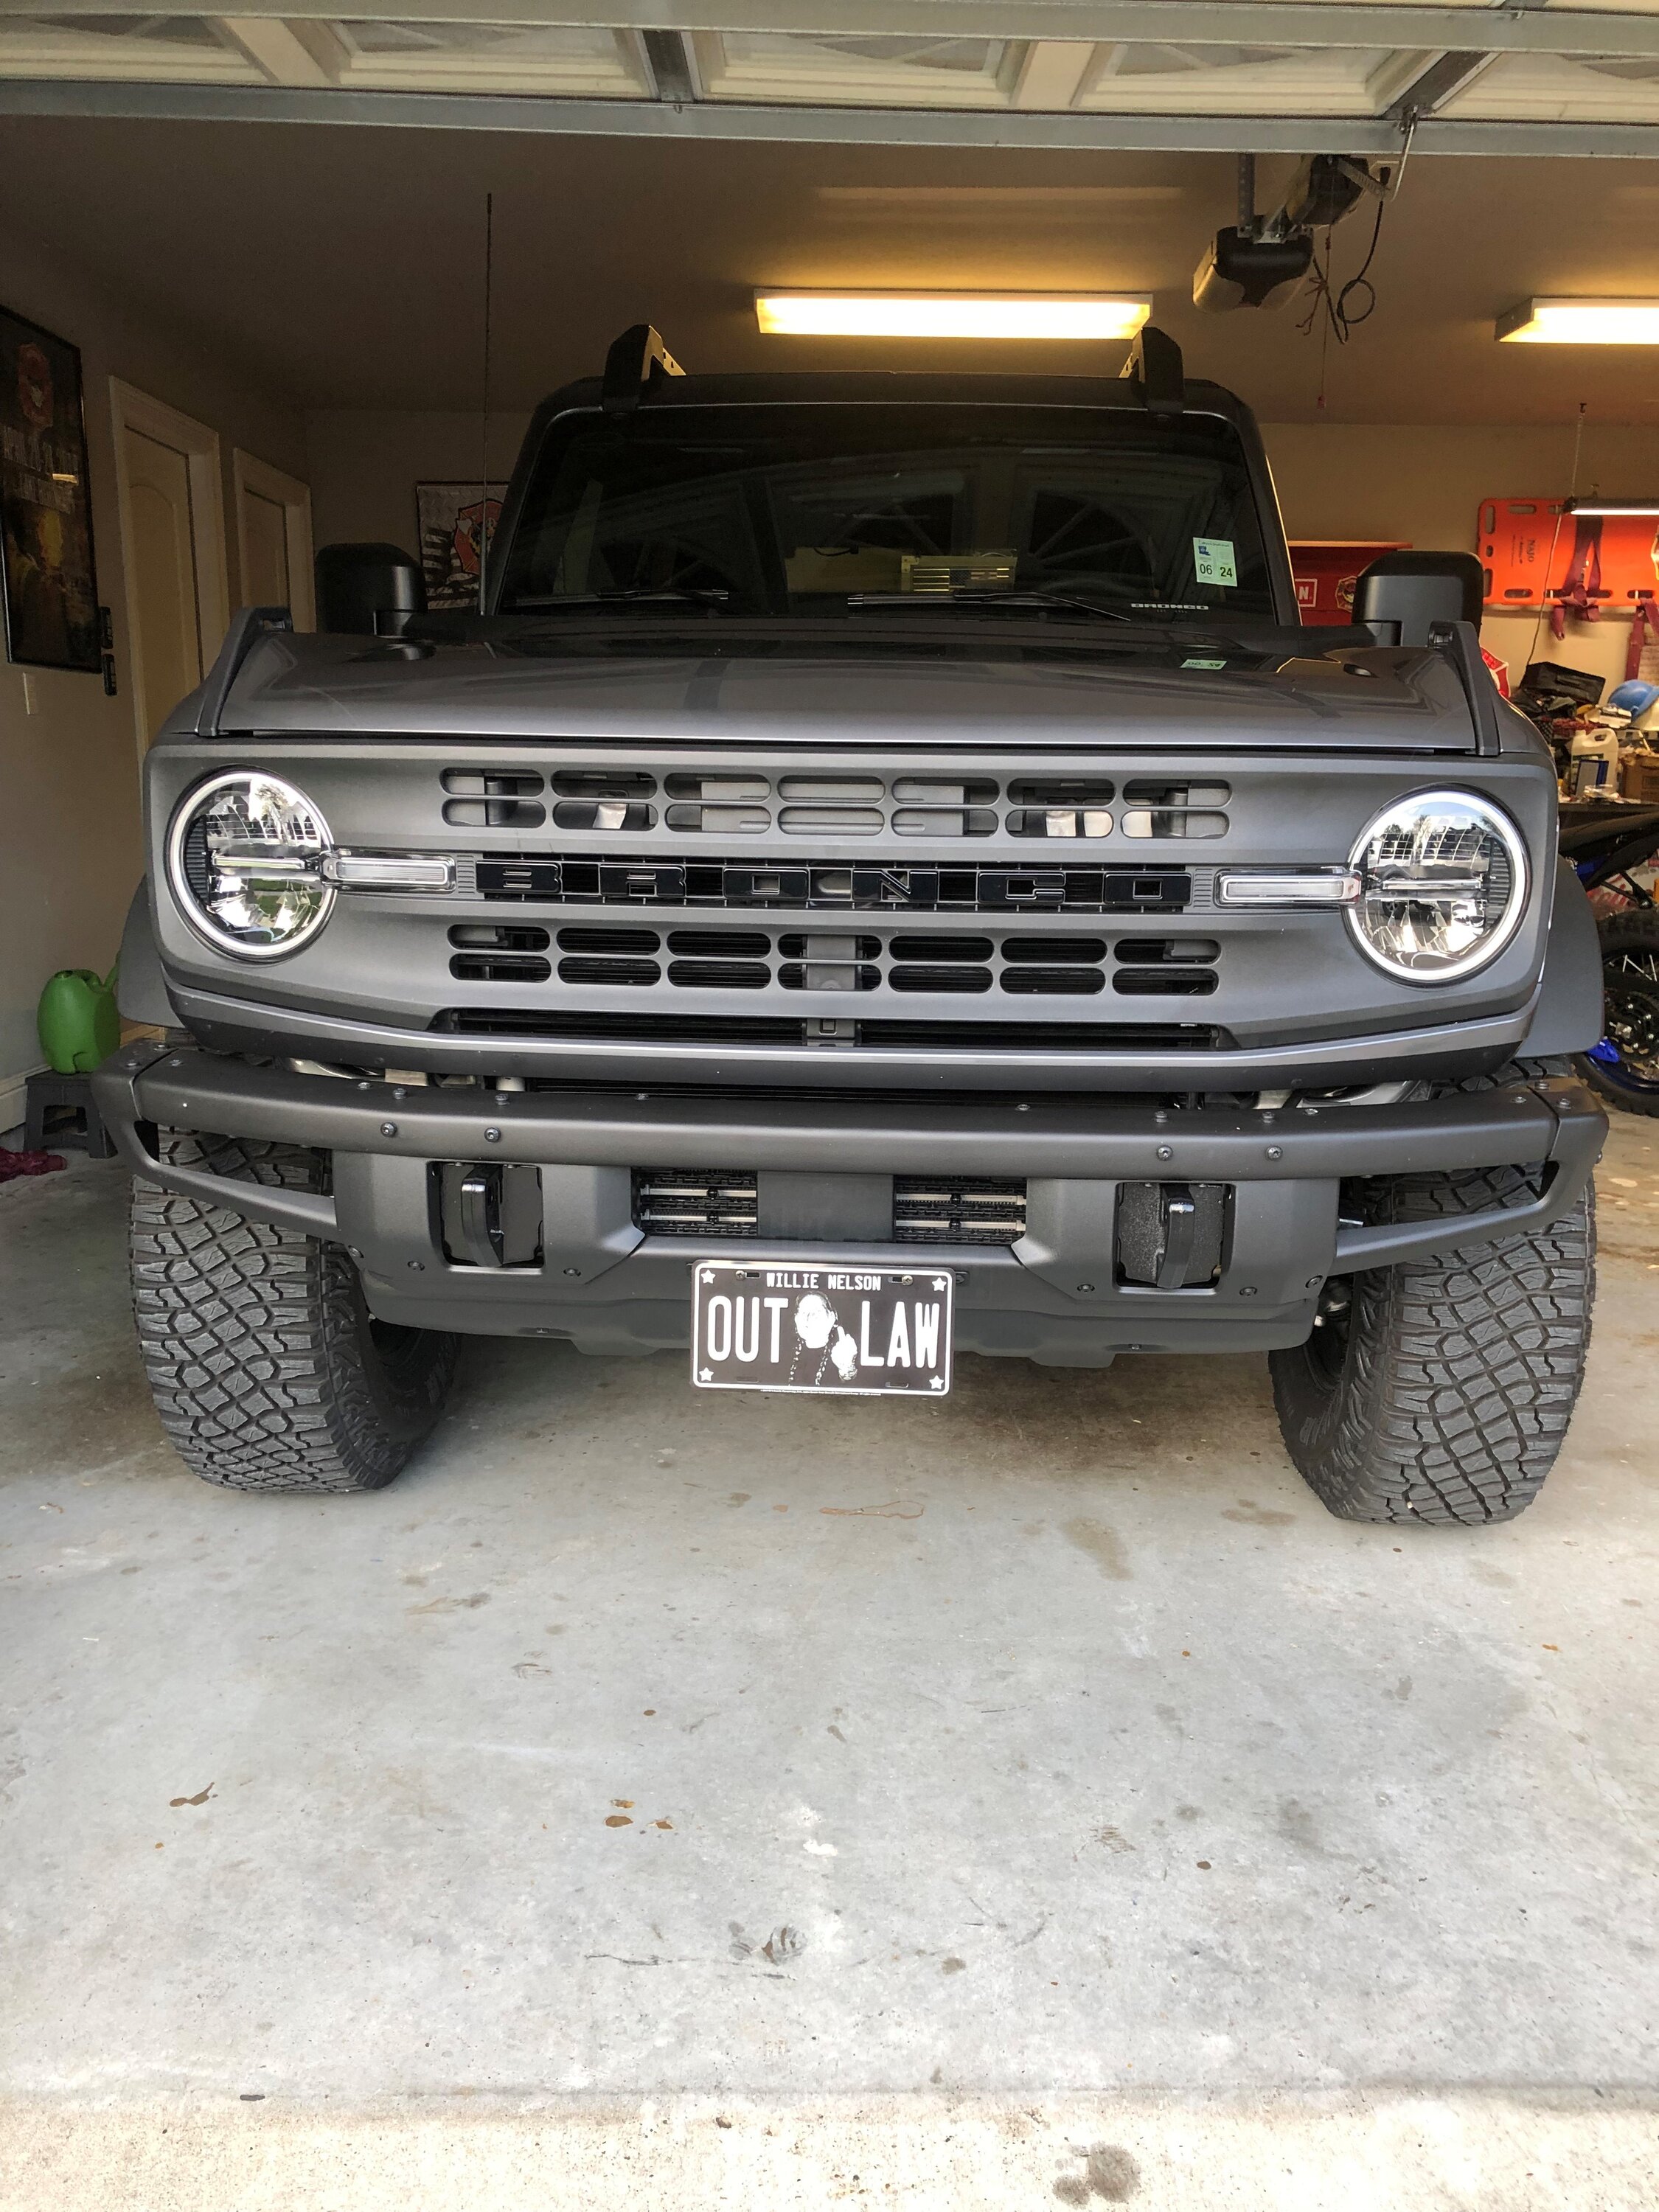 Ford Bronco 5/9 Build Week group. (ManSquatch Week) Outlaw